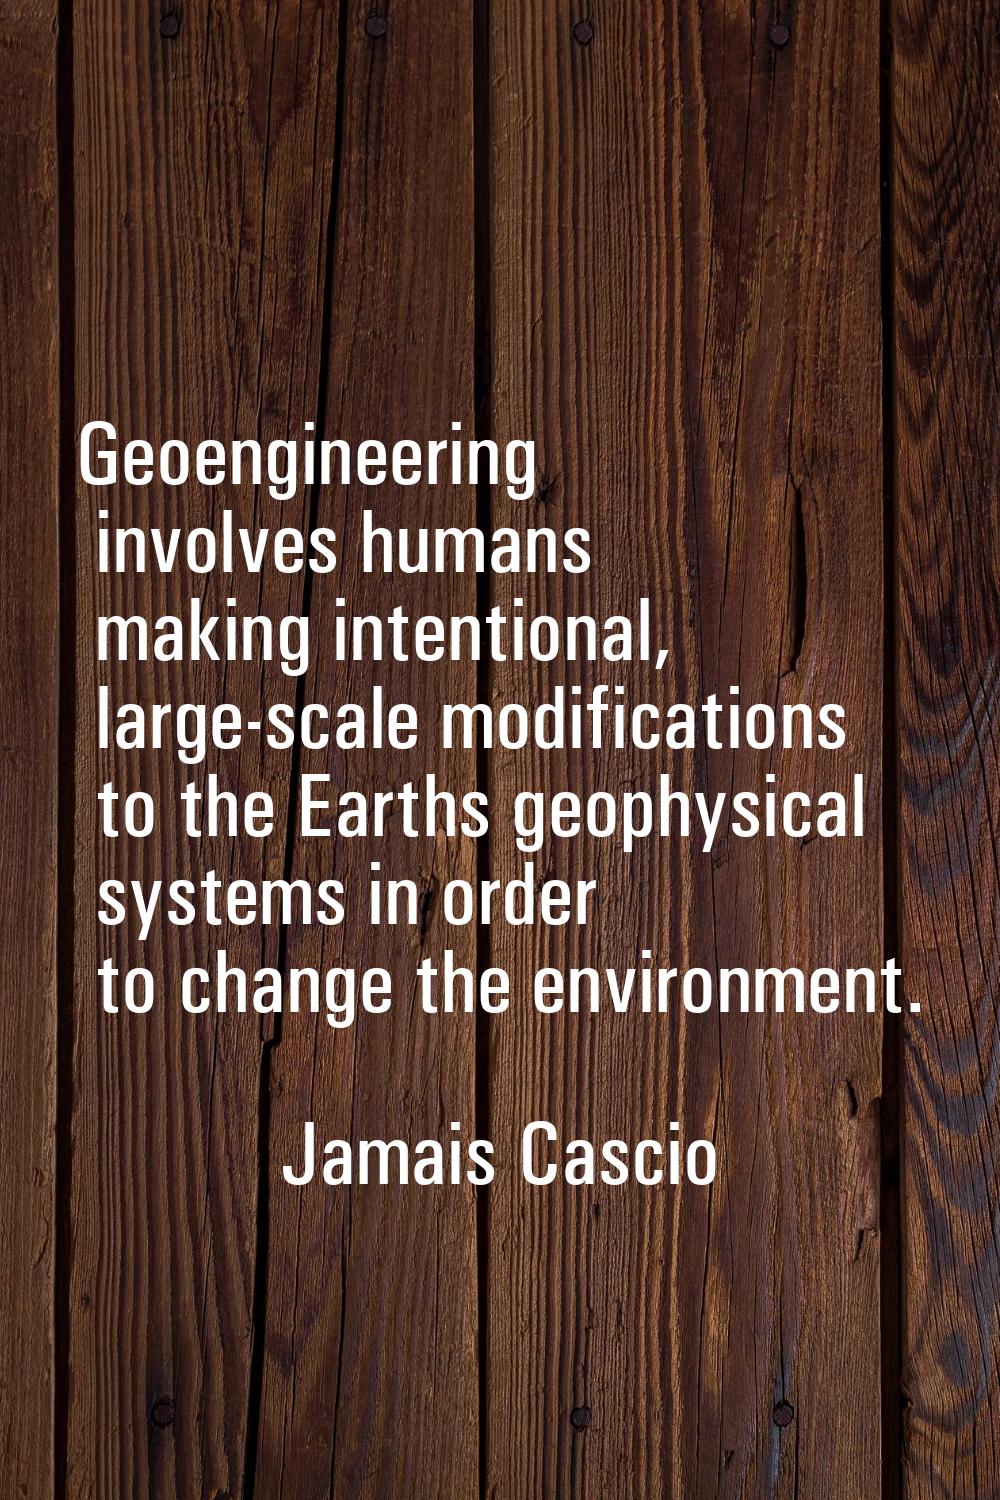 Geoengineering involves humans making intentional, large-scale modifications to the Earths geophysi